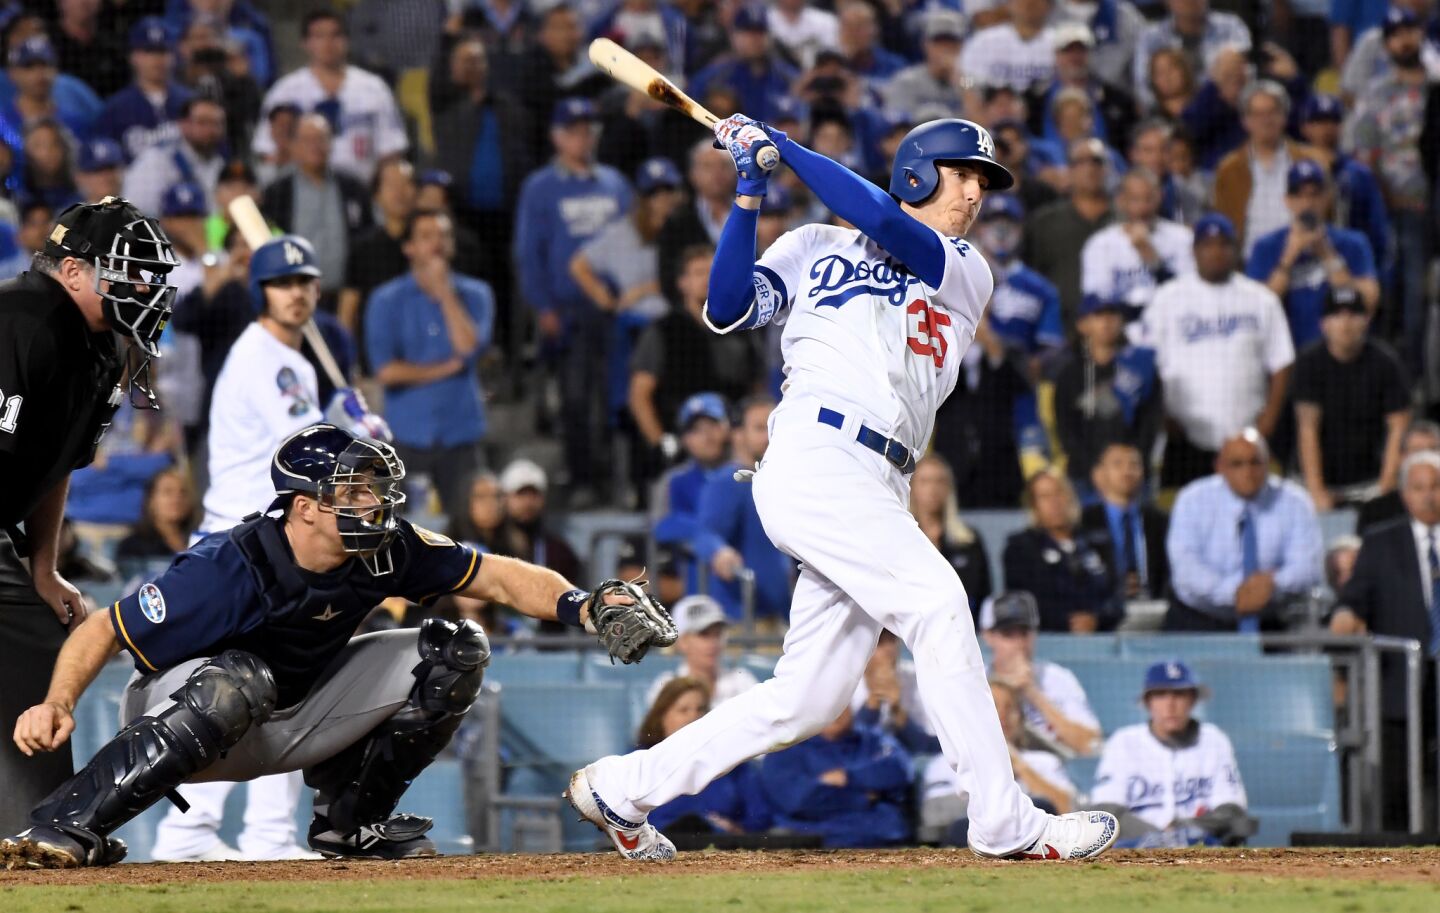 Dodgers Cody Bellinger hits the game-winning RBI against the Brewers in the 13th inning.